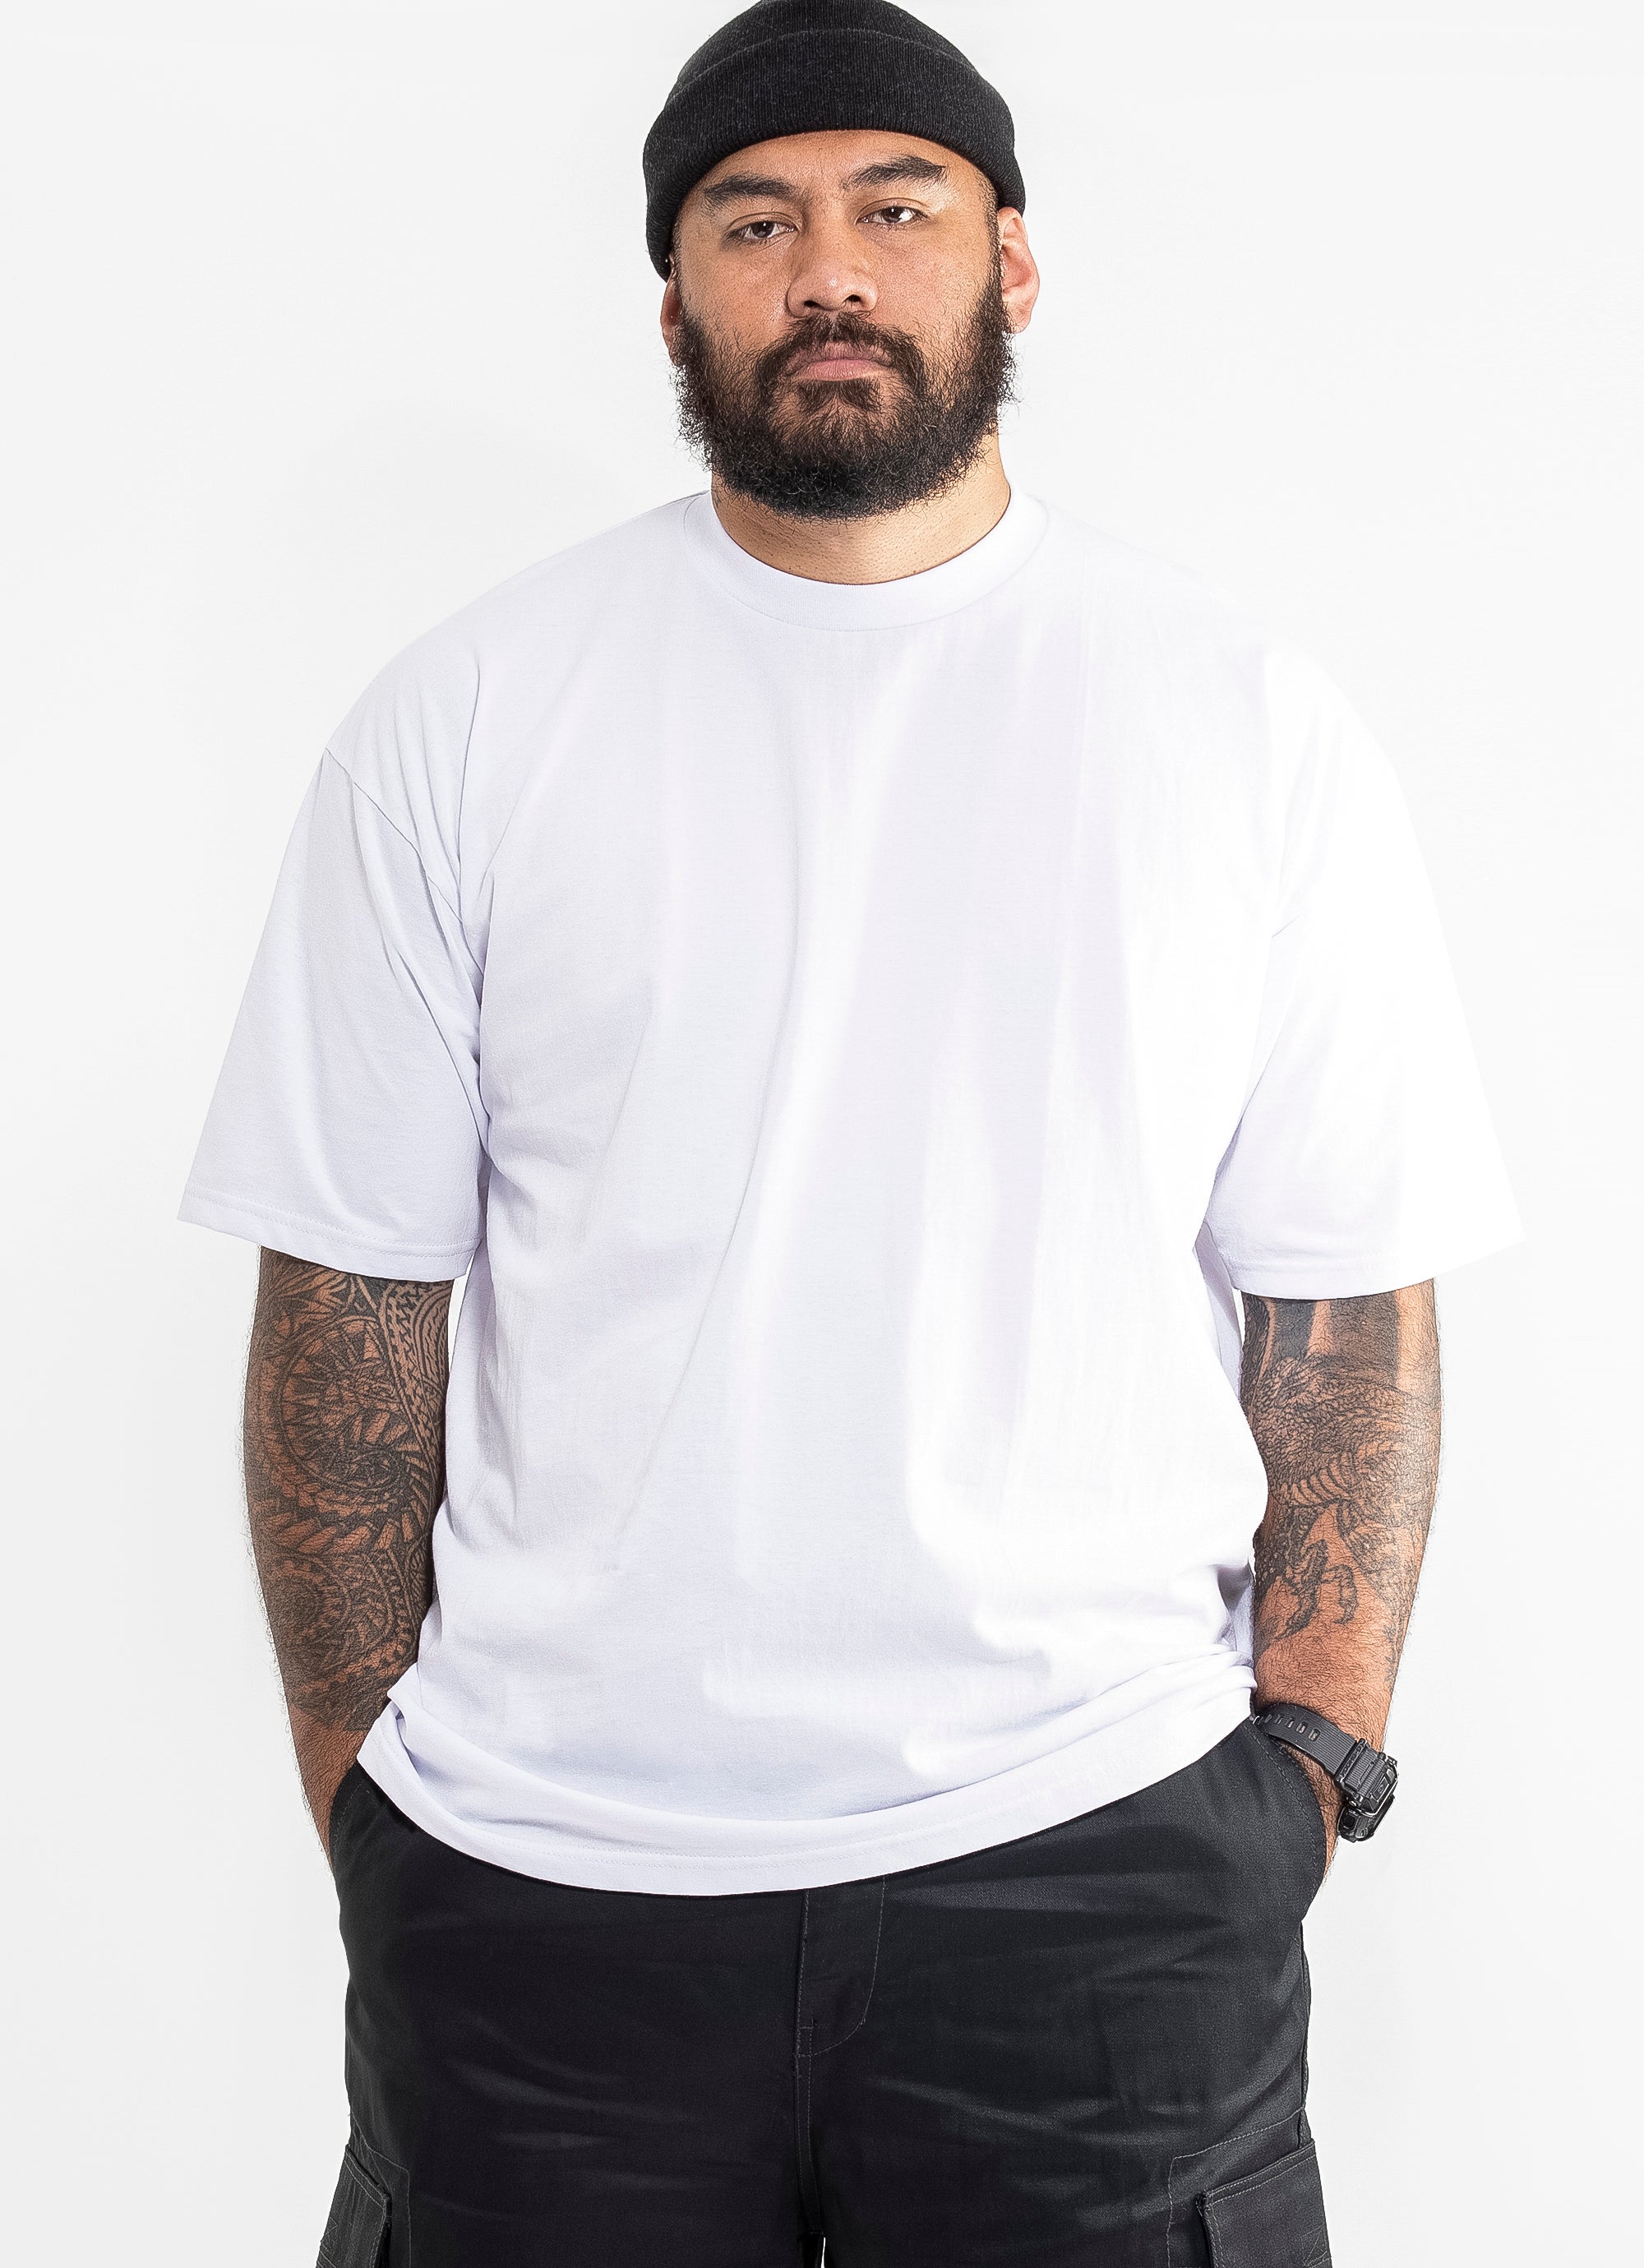 unearth Independence Brotherhood Proclub Heavy Weight White T-shirt - Big & Tall in Unknown | Red Rat